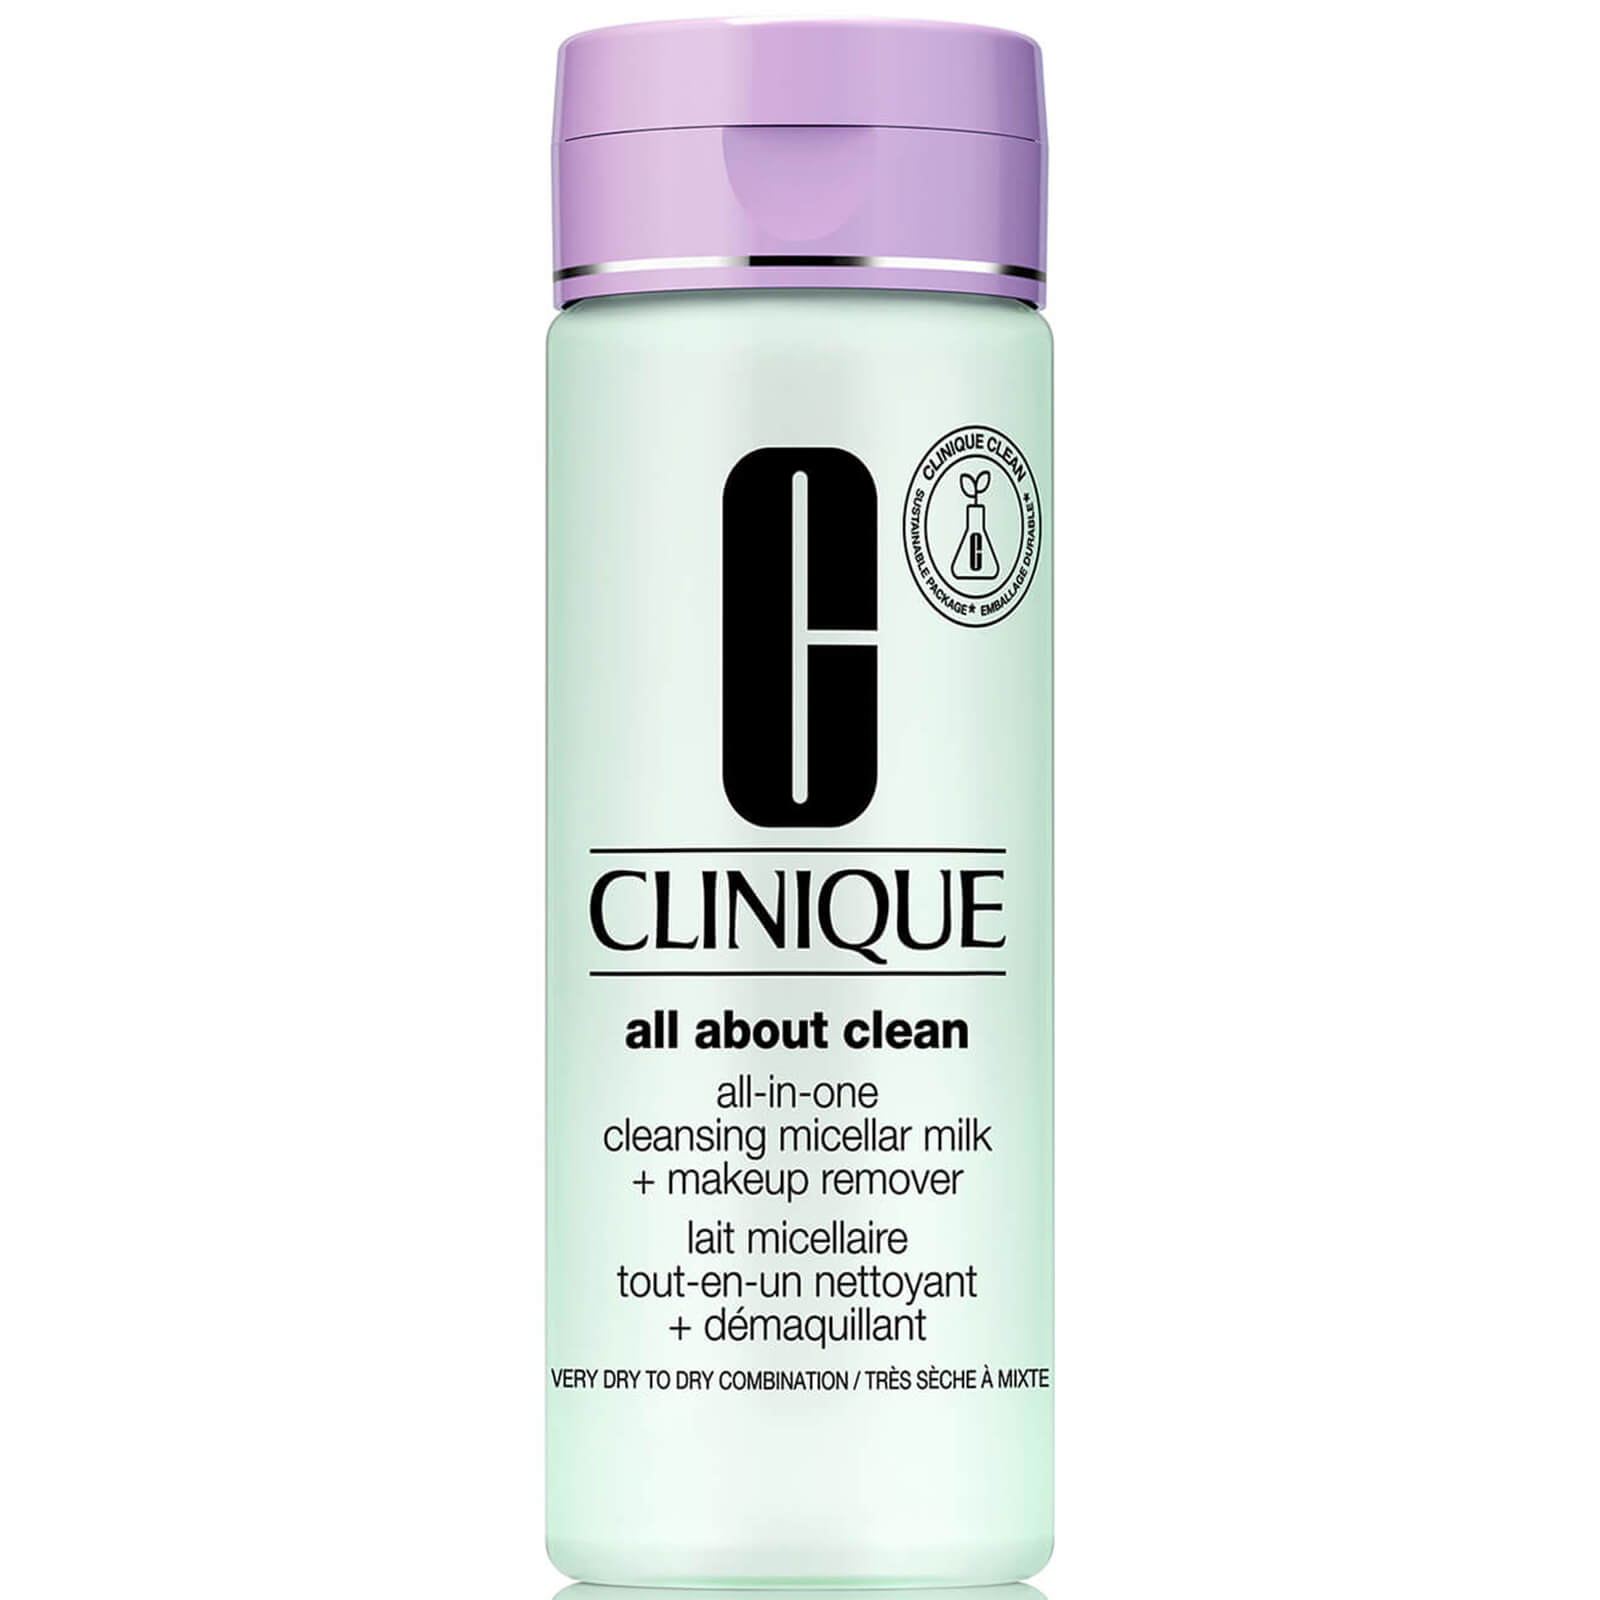 Photos - Facial / Body Cleansing Product Clinique All in One Cleansing Micellar Milk for Dry/Combination Skin 200ml 